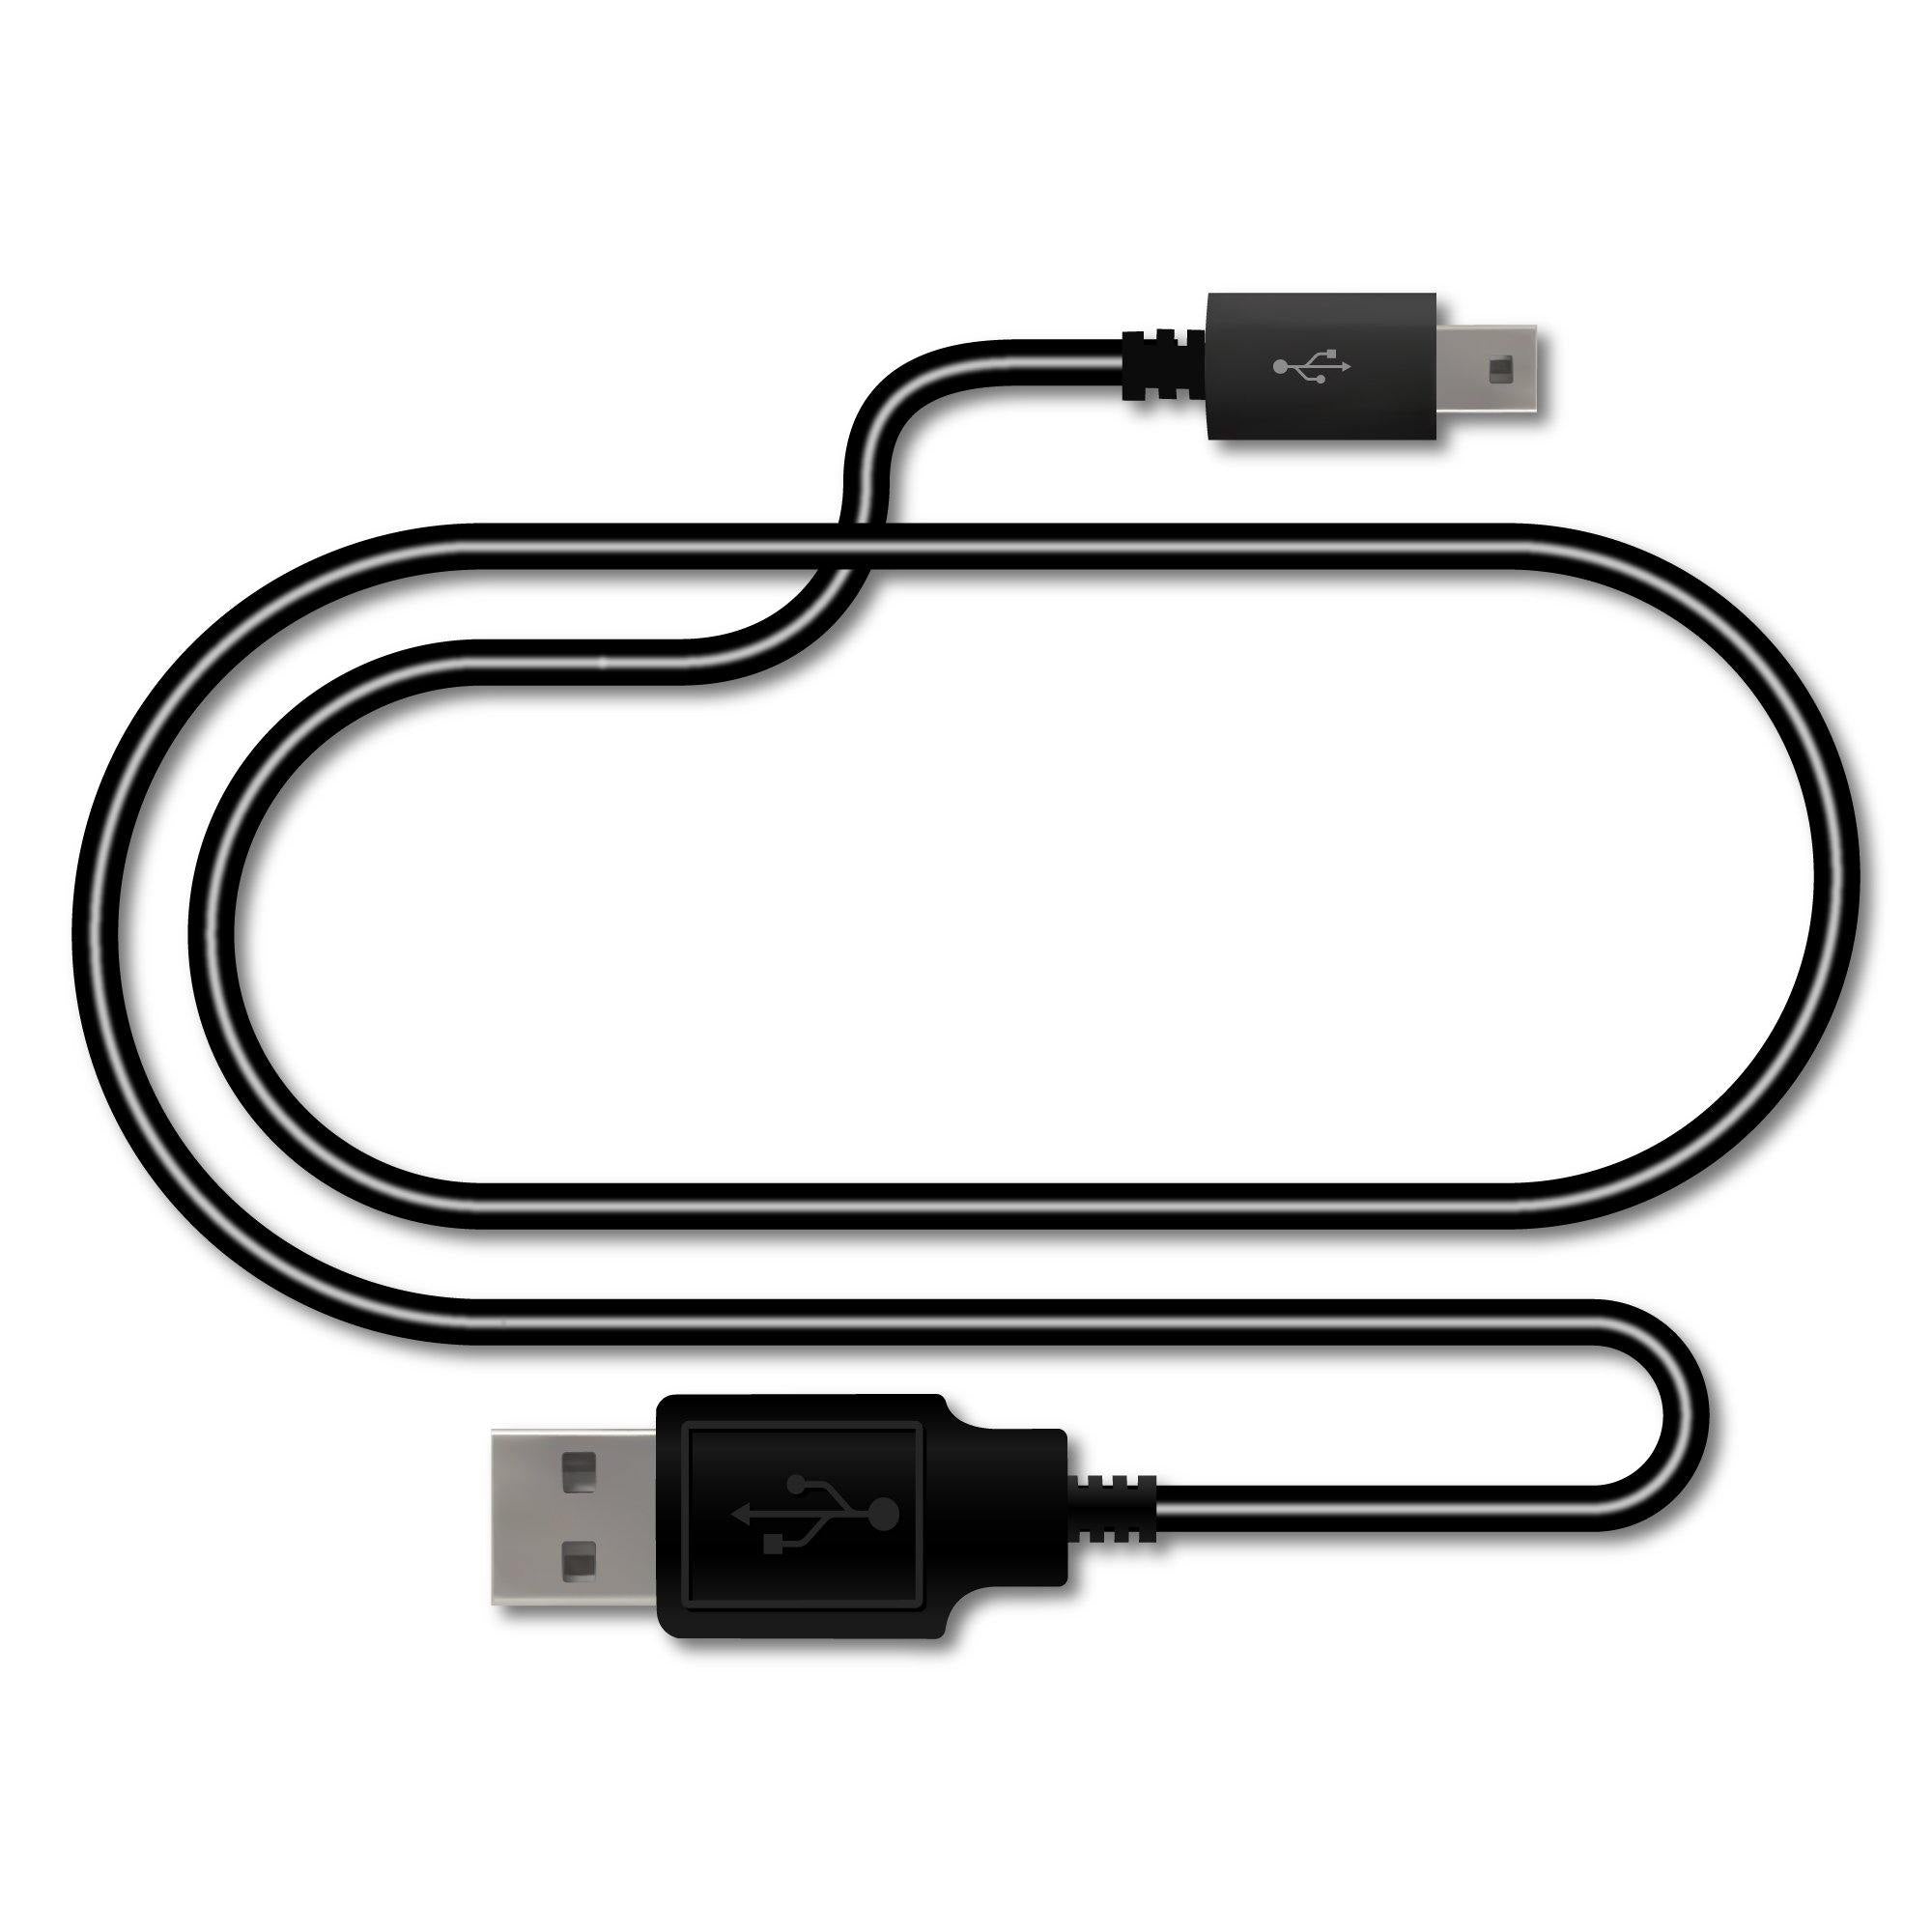 2.5FT Mini-USB Data Cable  to connect your camera to your PC/MAC. - ROVE Dash Cam